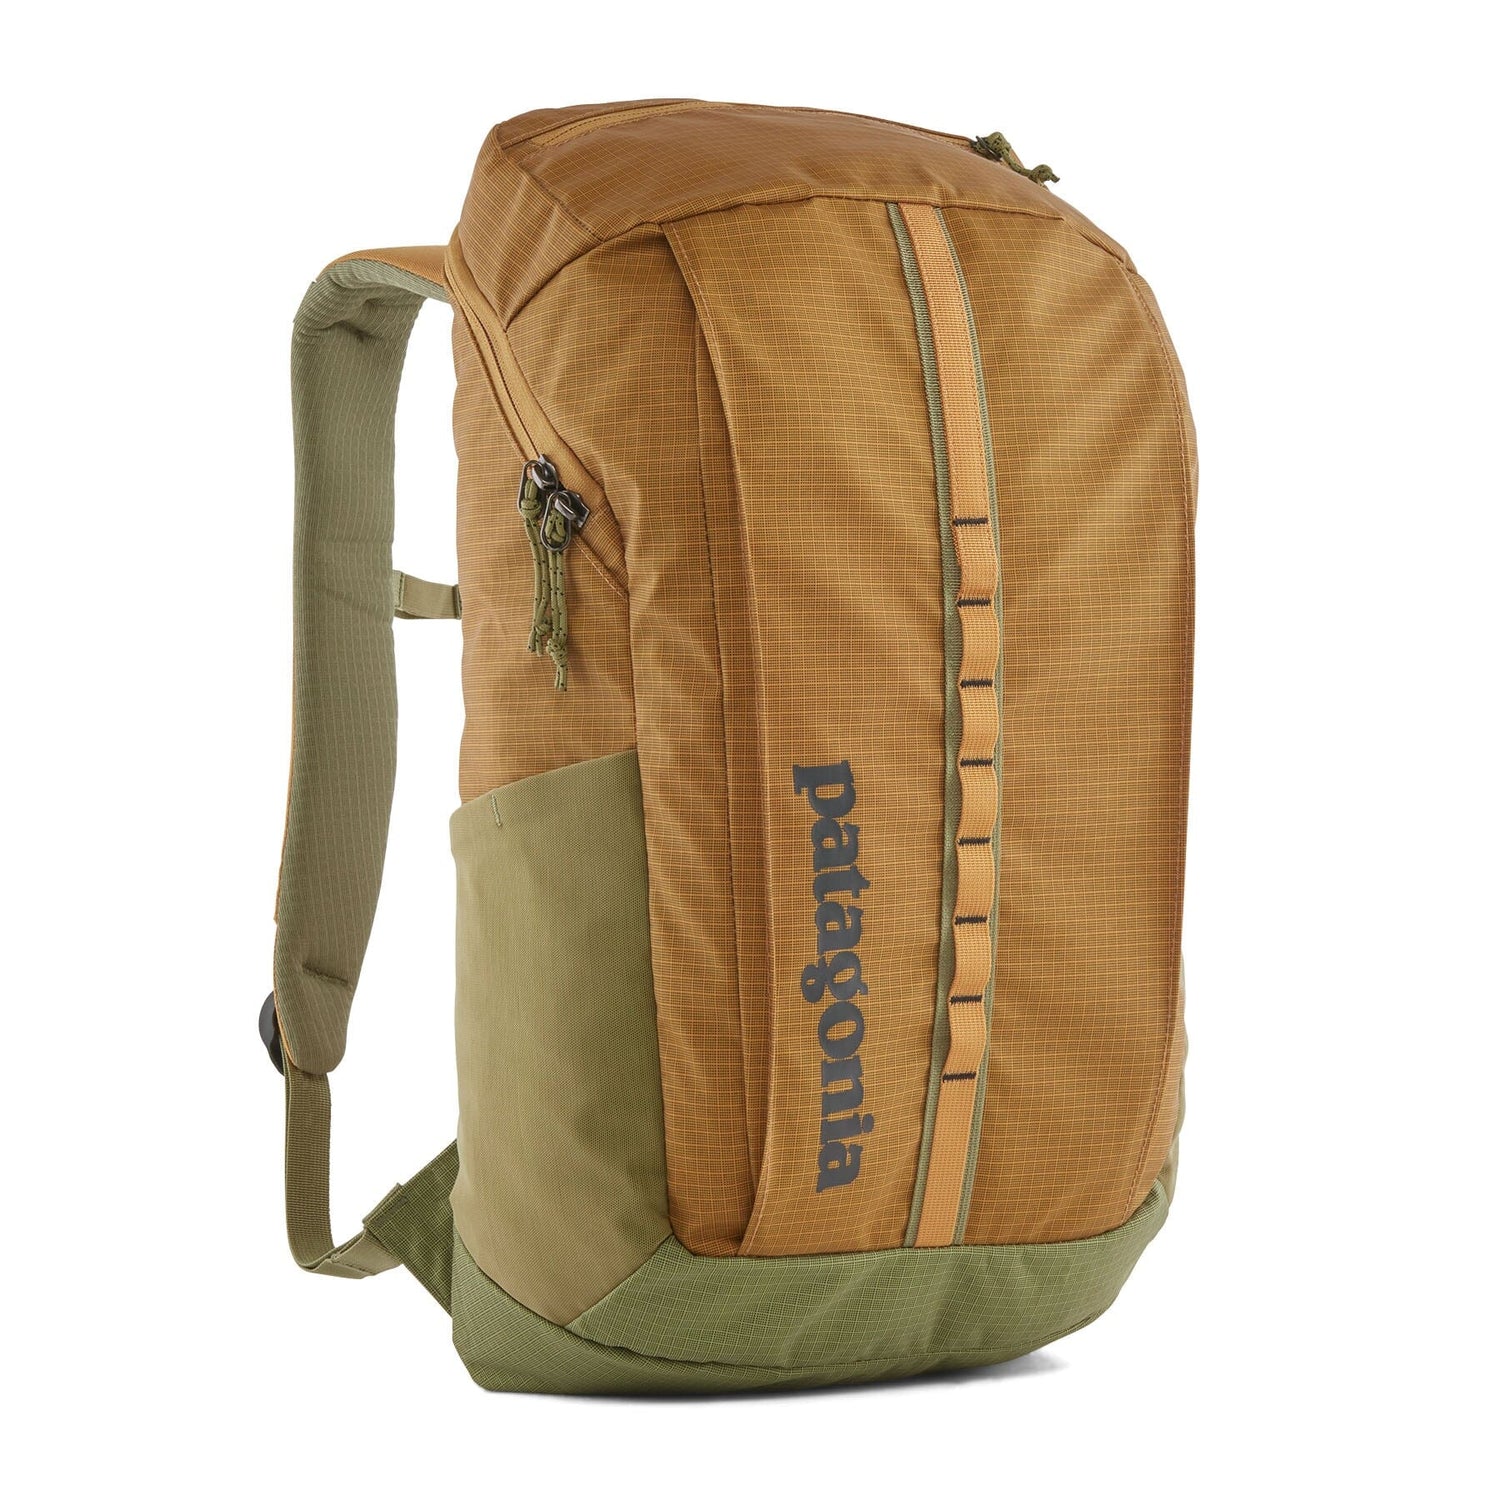 Patagonia Black Hole Pack 25L - 100% Recycled Polyester Pufferfish Gold Bags